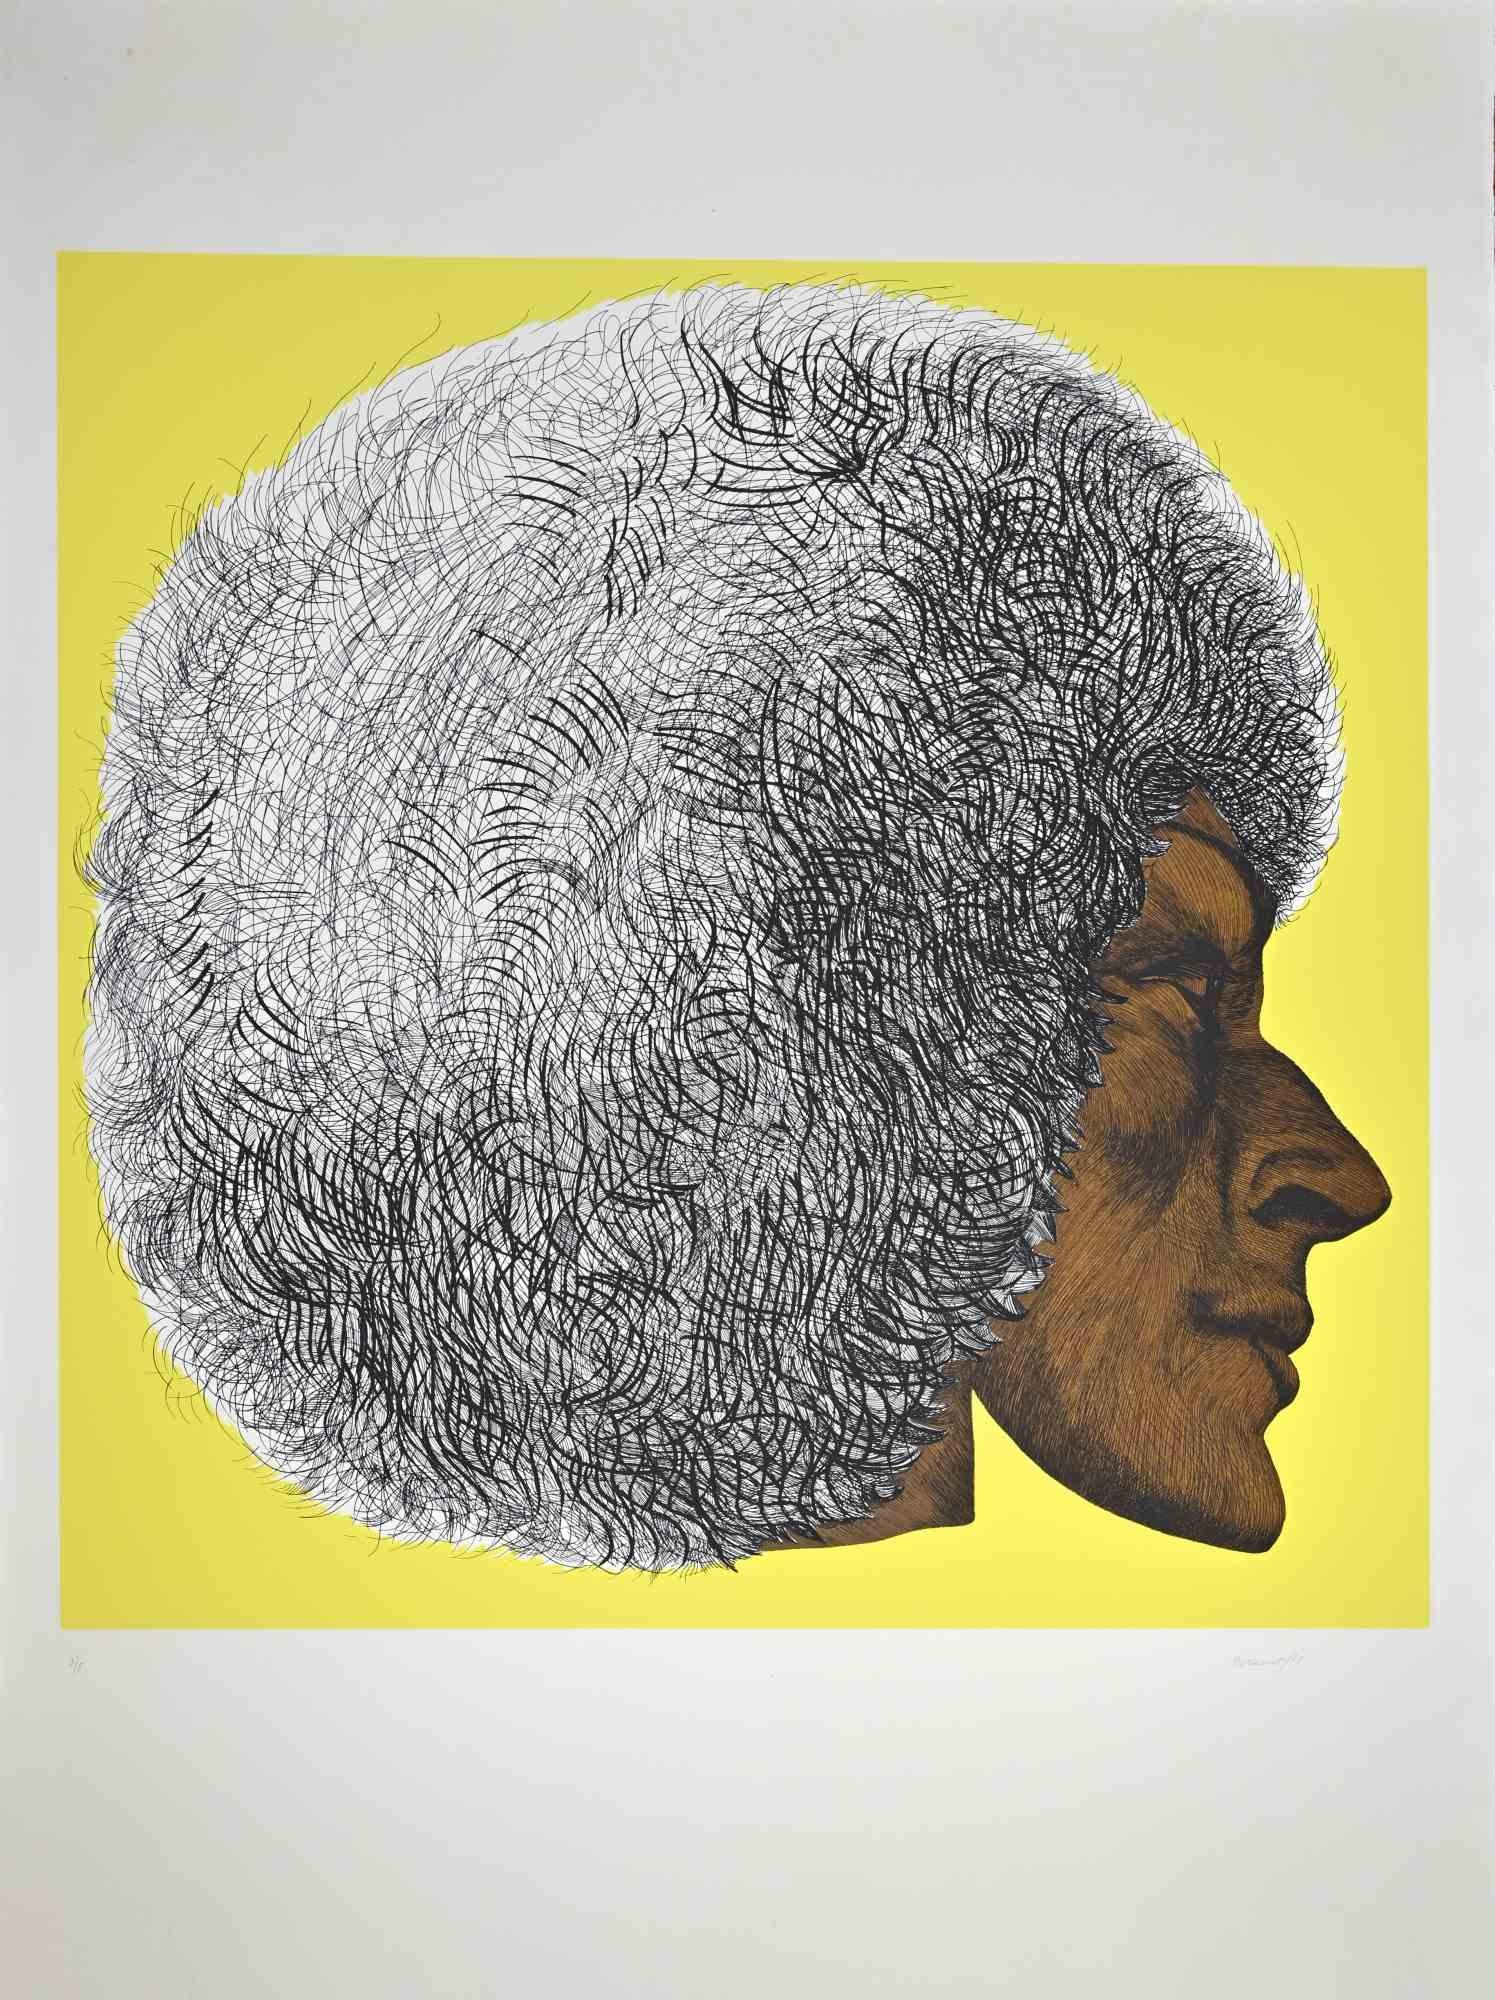 Profile Yellow II - Profilo giallo II is a contemporary artwork realized by Giacomo Porzano in 1972.

Hand signed and dated by artist with pencil.

Numbered on the lower margin. Edition of 3/5